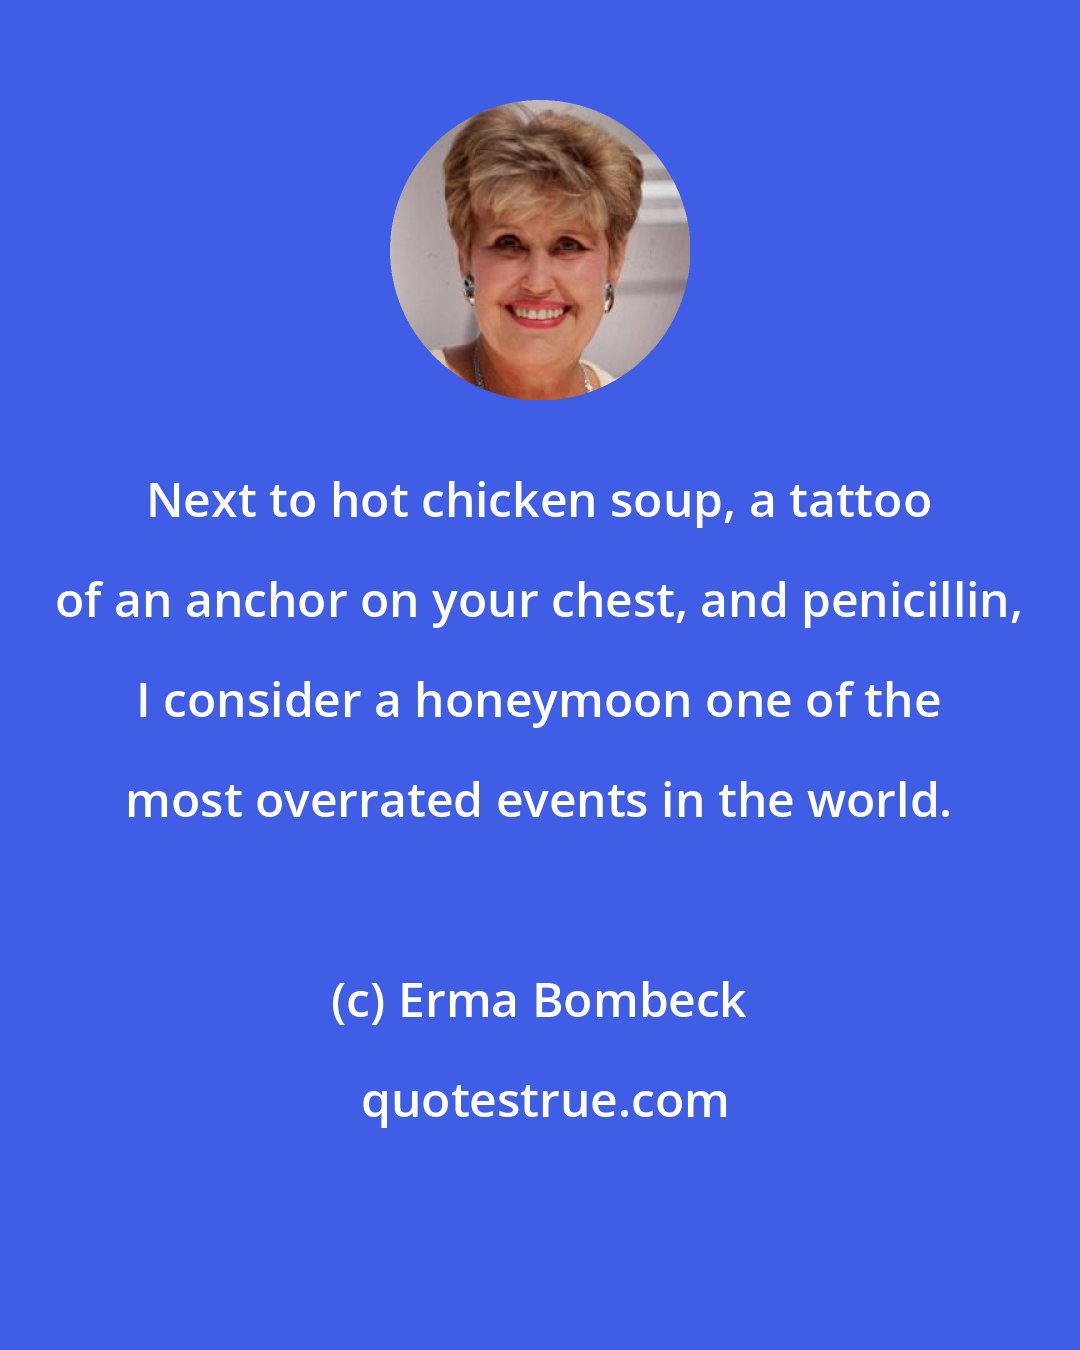 Erma Bombeck: Next to hot chicken soup, a tattoo of an anchor on your chest, and penicillin, I consider a honeymoon one of the most overrated events in the world.